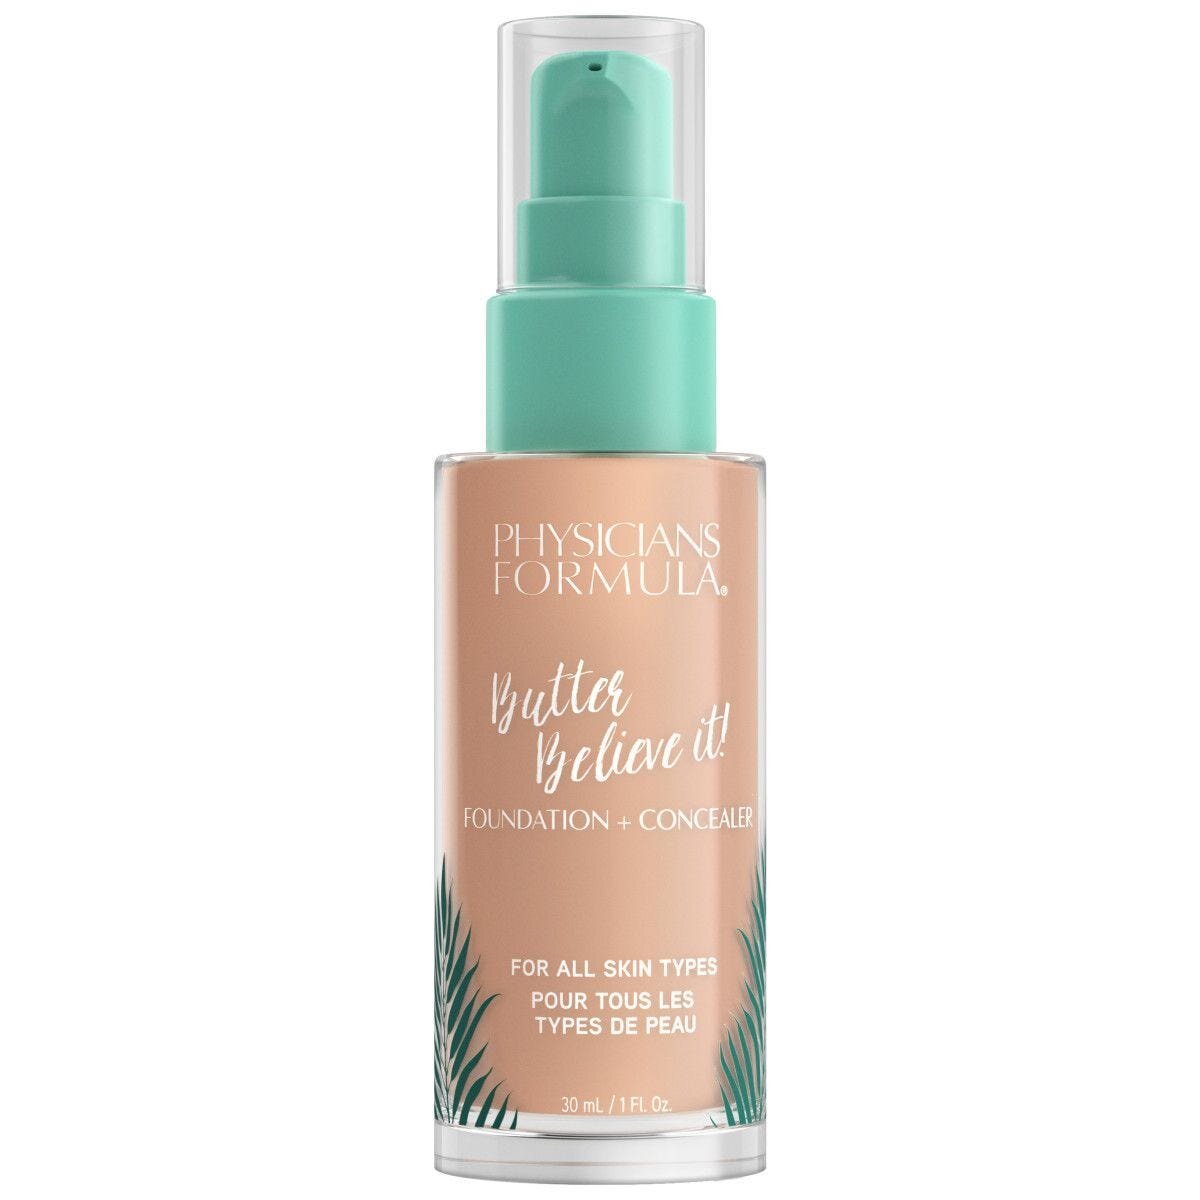 BUTTER BELIEVE IT FOUNDATION AND CONCEALER LIGHT - PHYSICIANS FORMULA